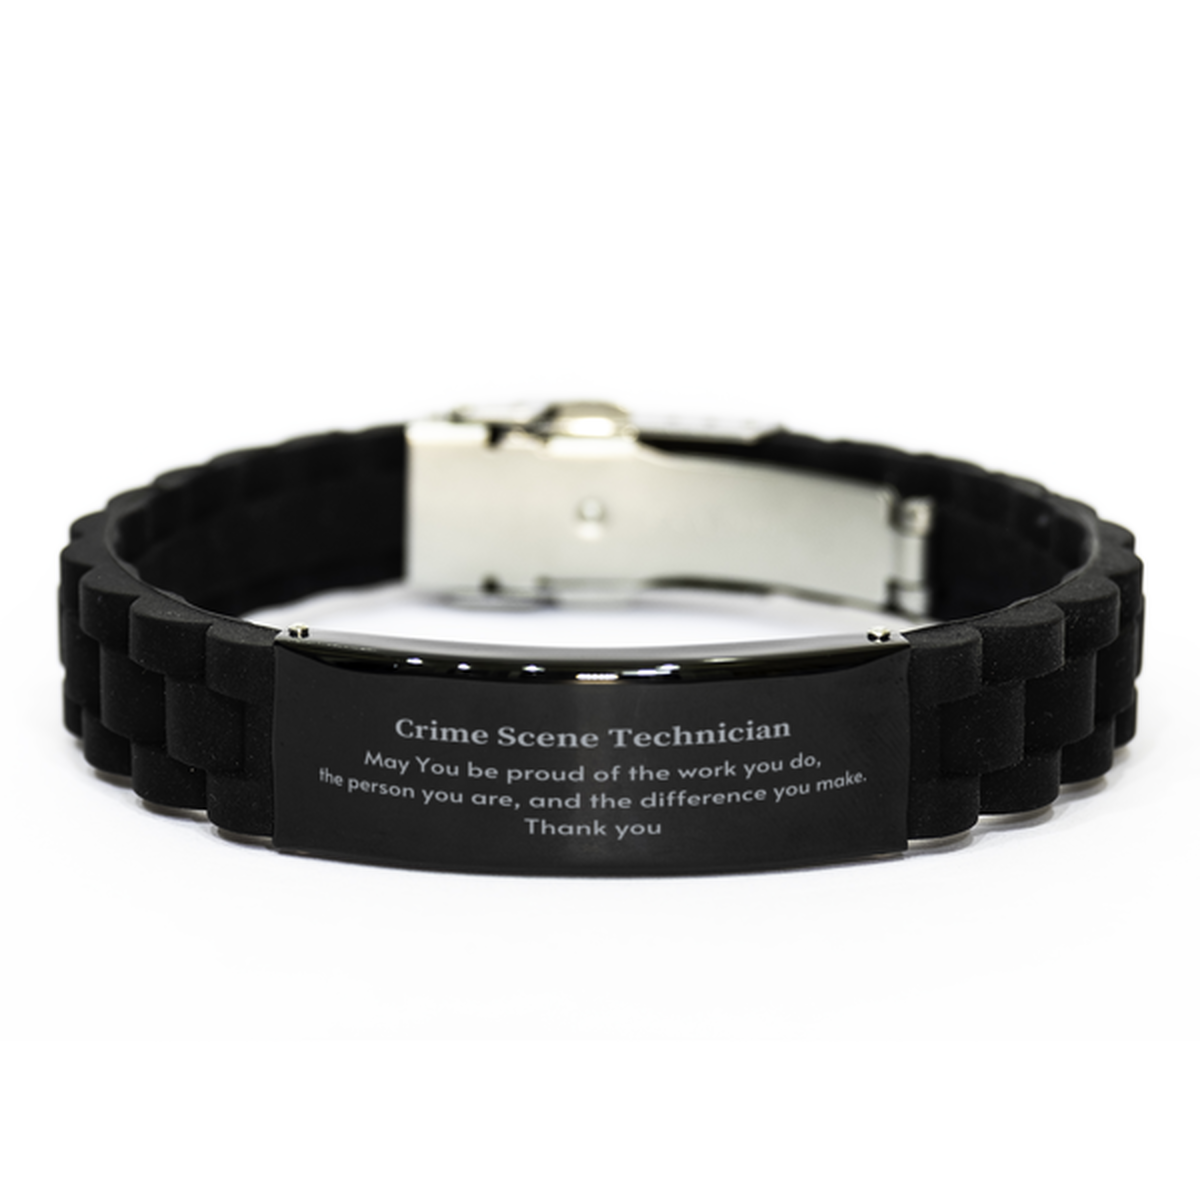 Heartwarming Black Glidelock Clasp Bracelet Retirement Coworkers Gifts for Crime Scene Technician, Crime Scene Technician May You be proud of the work you do, the person you are Gifts for Boss Men Women Friends